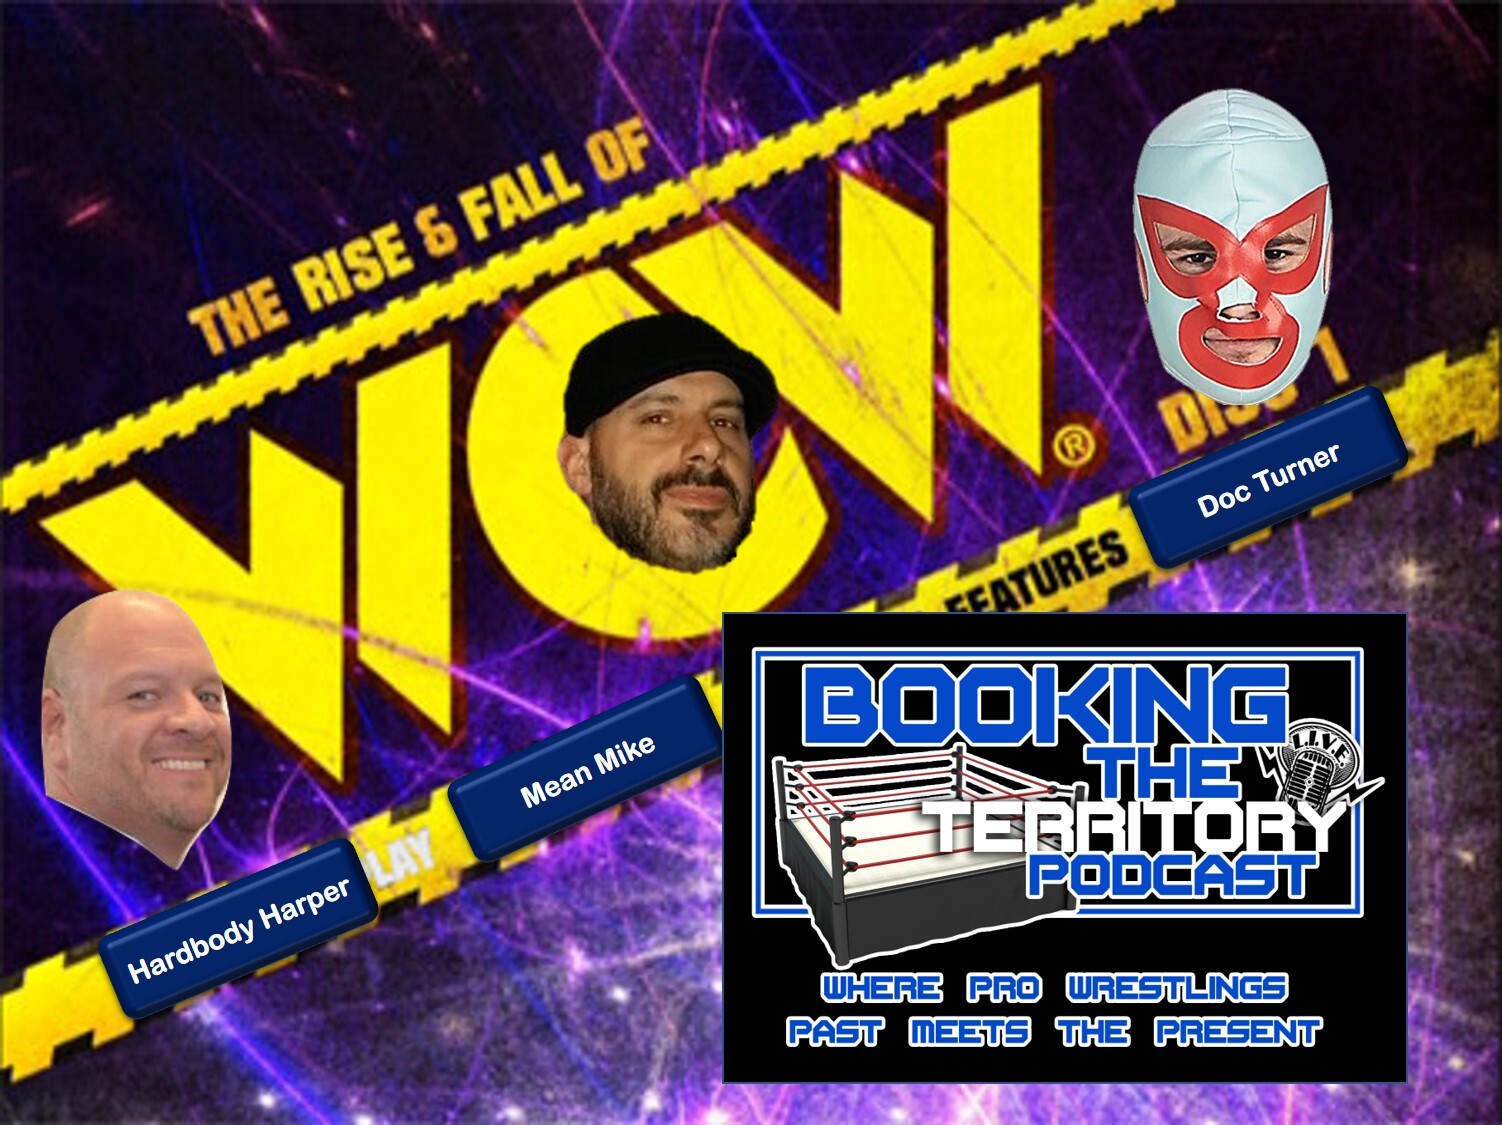 BONUS SHOW: The BTT Boys Discuss The Rise and Fall of WCW (World Championship Wrestling)